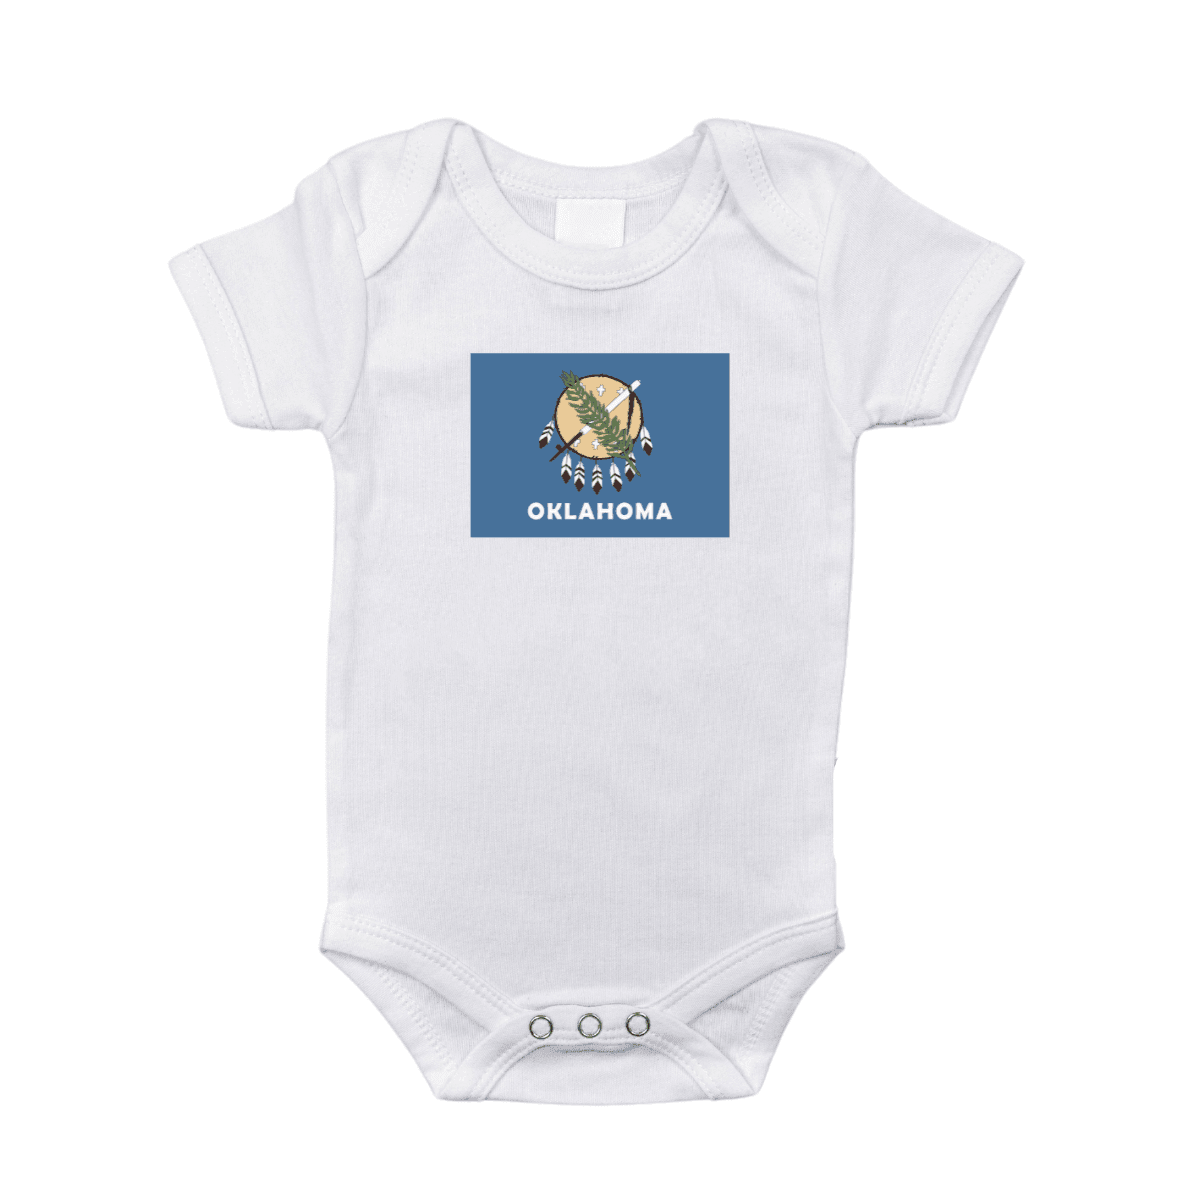 Blue baby onesie with Oklahoma flag design, featuring a shield with a peace pipe and olive branch.